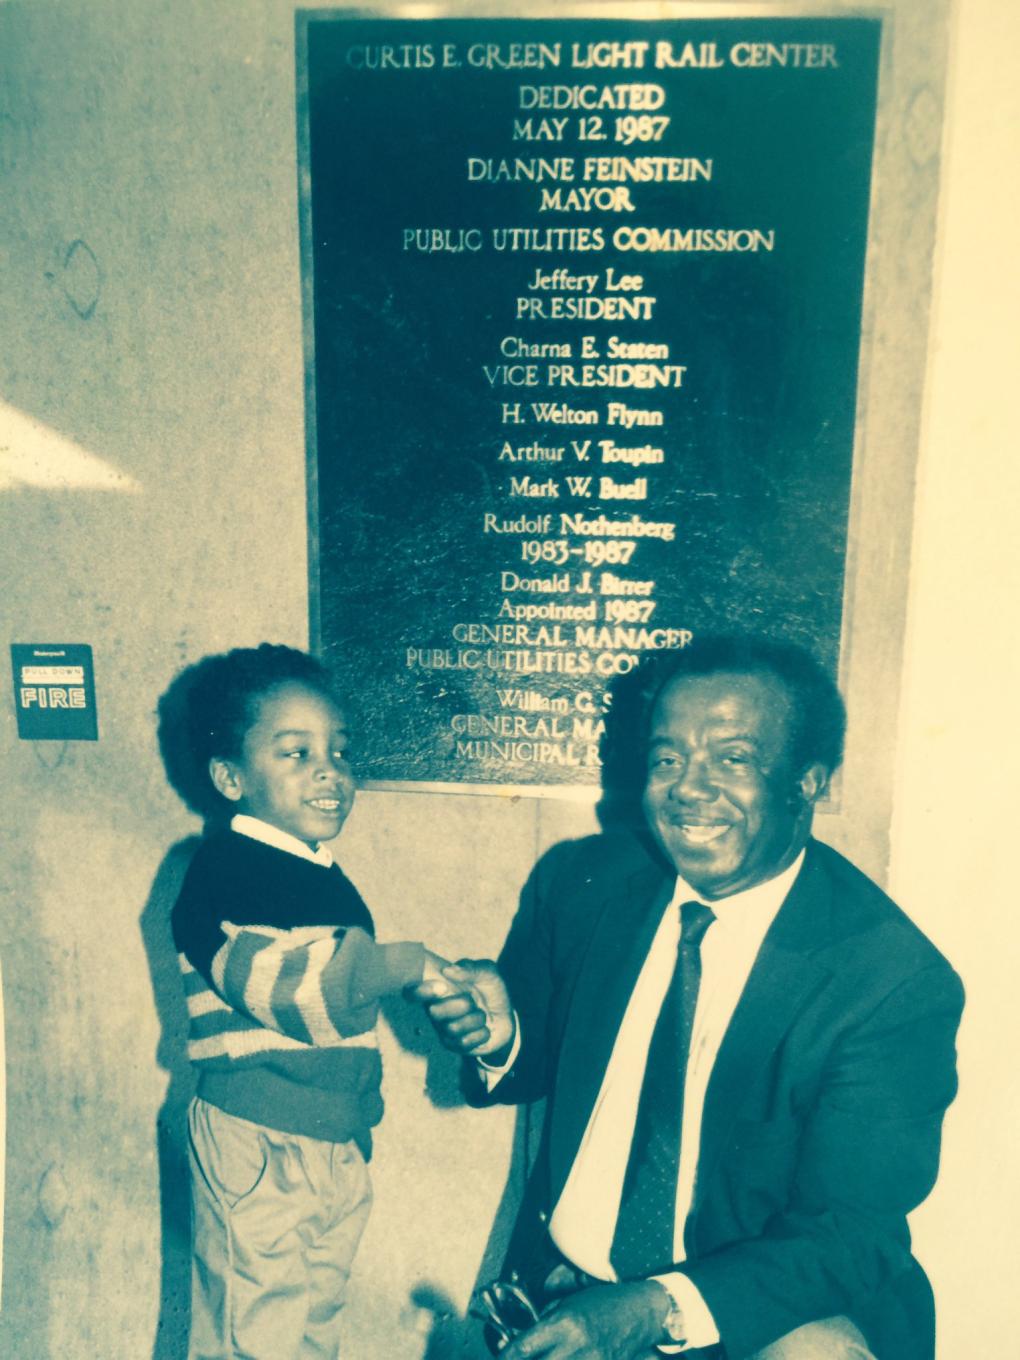 Dewayne Deams (left) with his great-grandfather Curtis E. Green at the dedication ceremony for the Curtis E. Green Light Rail Center.